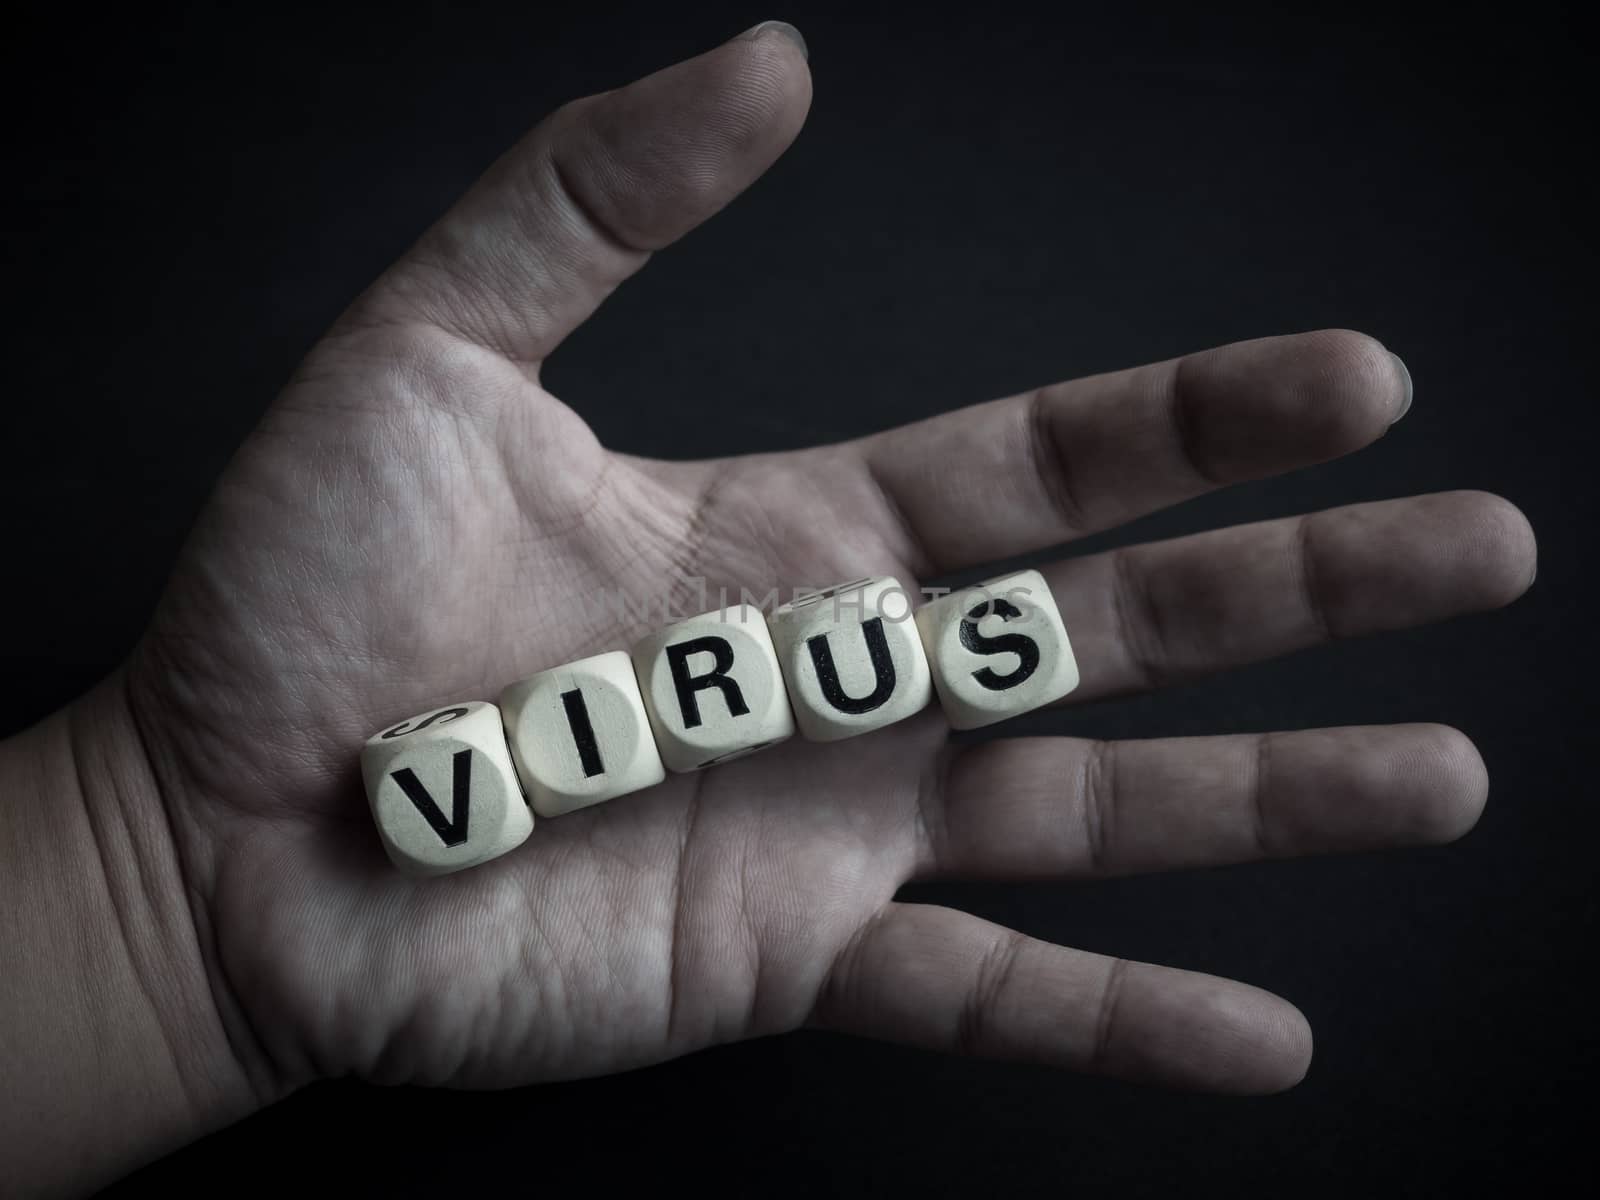 Coronavirus or Covid-19 concept. Wooden cubes text "VIRUS" in hand on dark background.